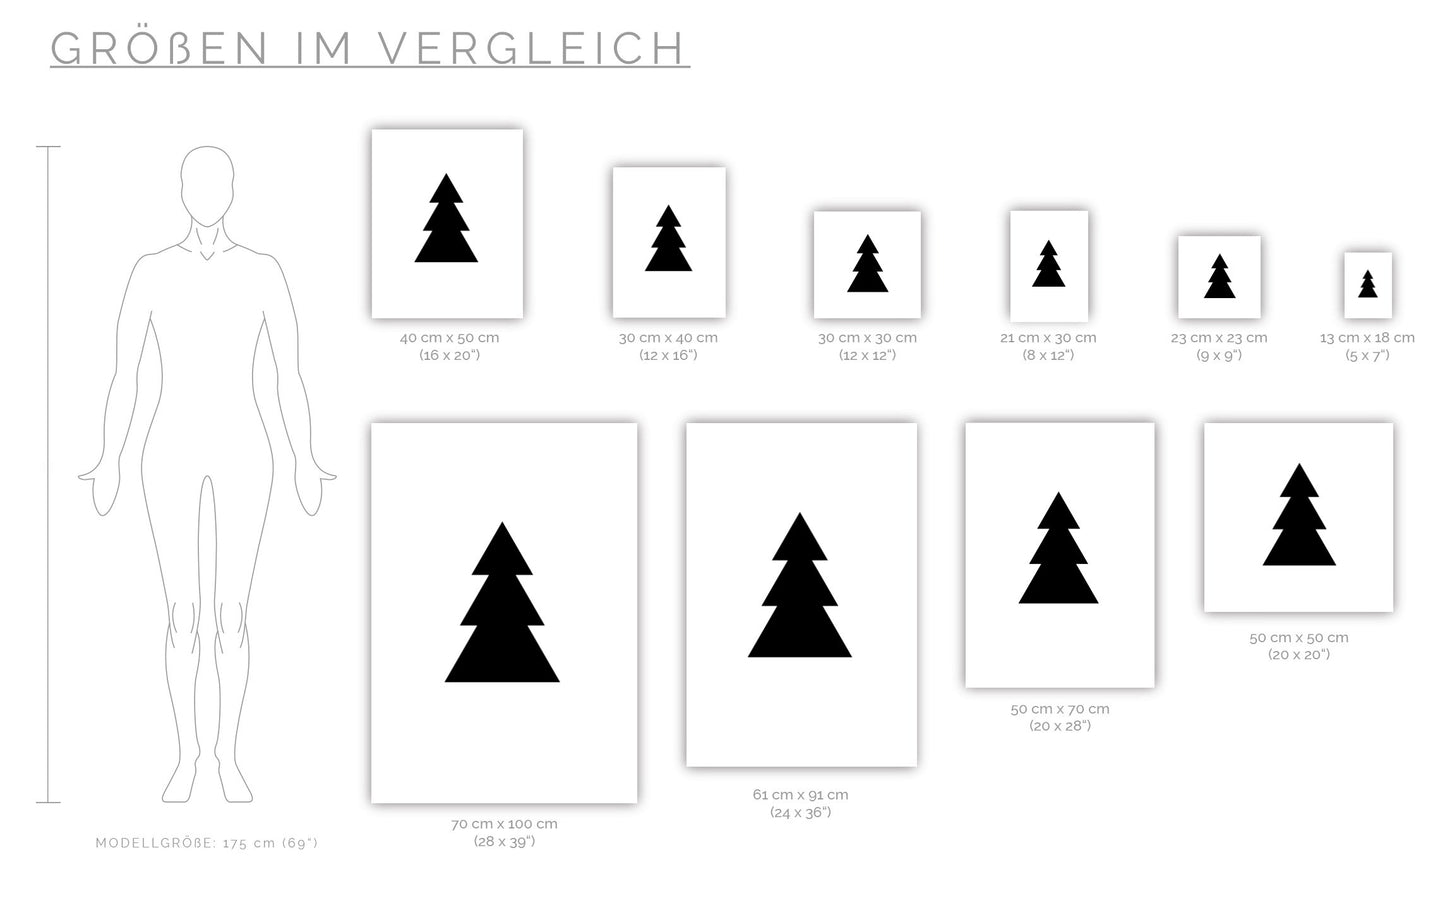 Poster Limited Edition: Tree #3